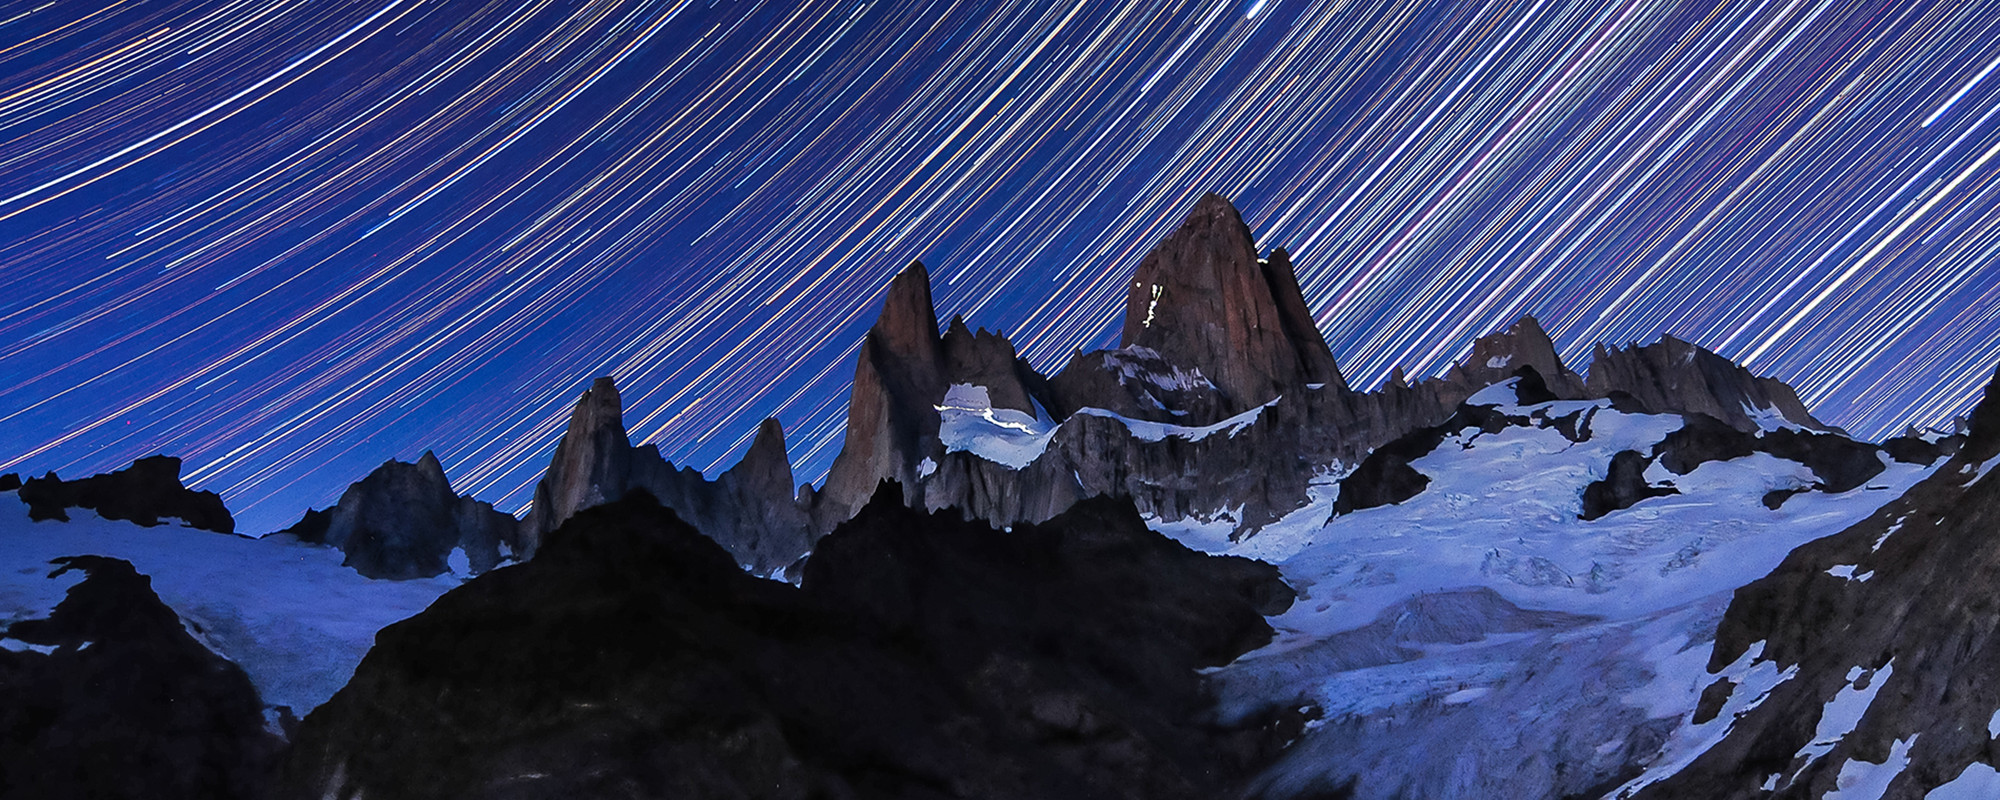 Star Trails Over Fitz Roy, Jonathan Byers, 2013